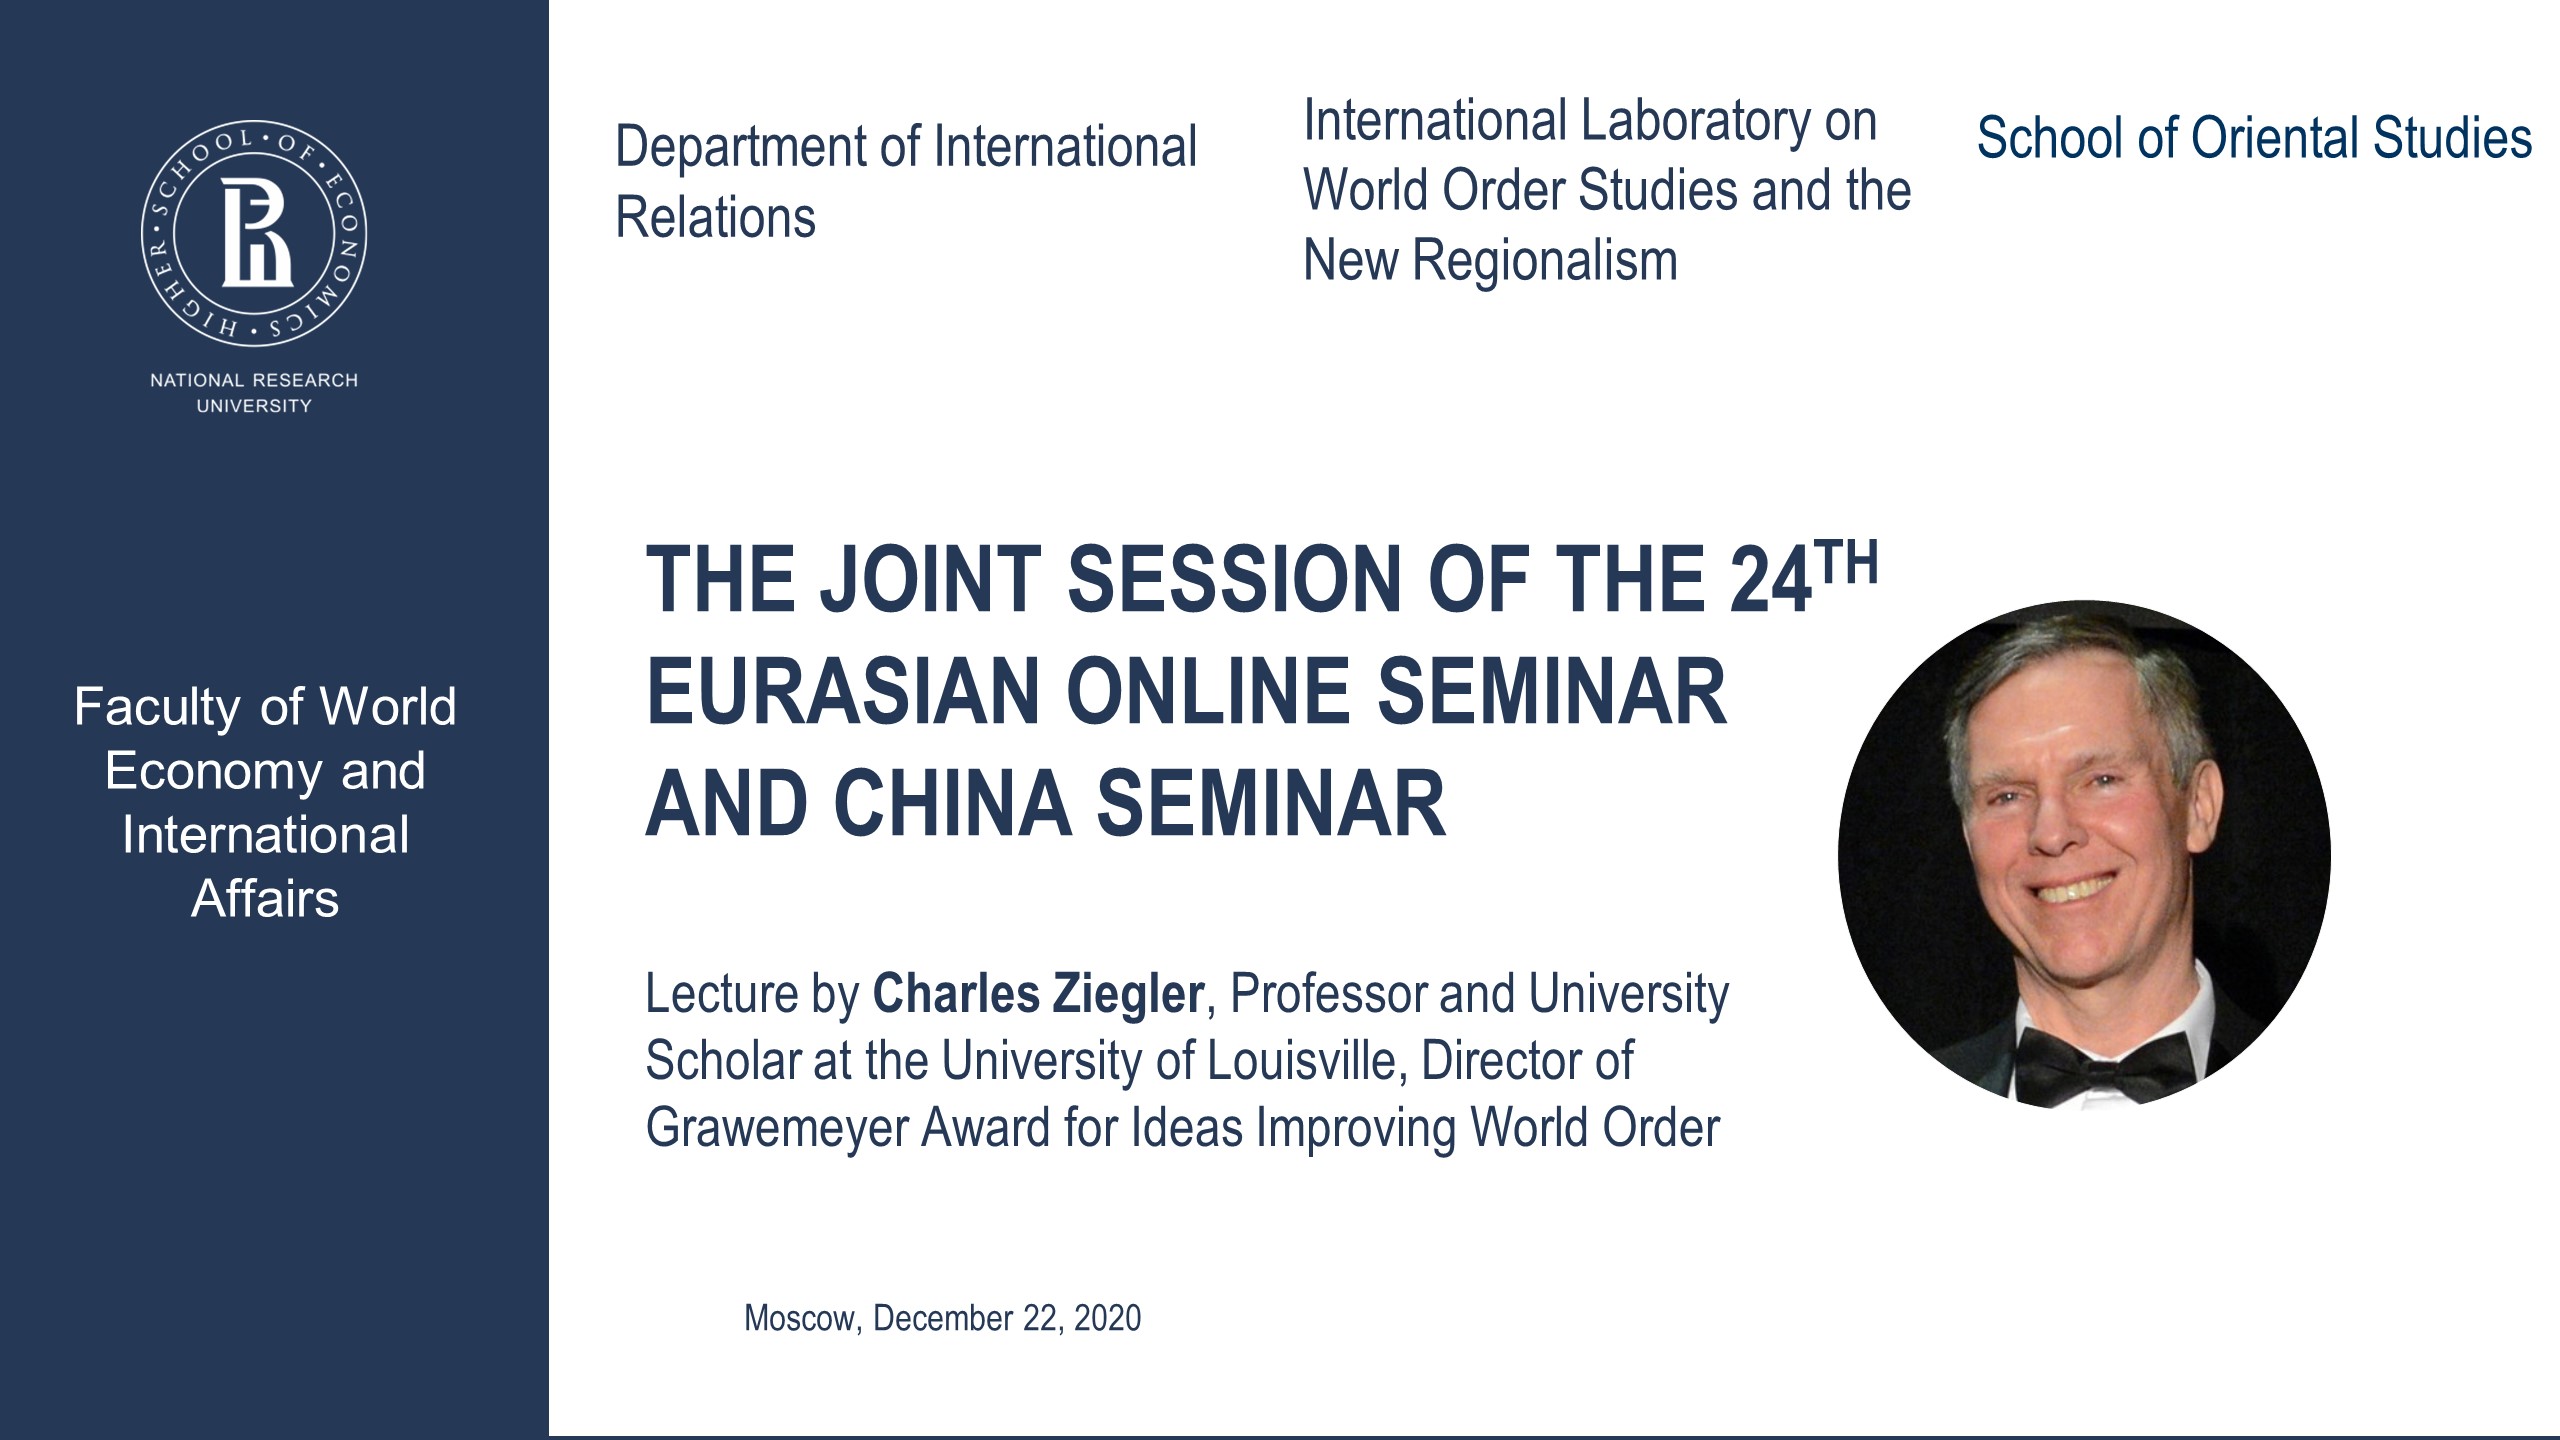 The Joint Session of Eurasian Online Seminar and China seminar with Professor Charles Ziegler